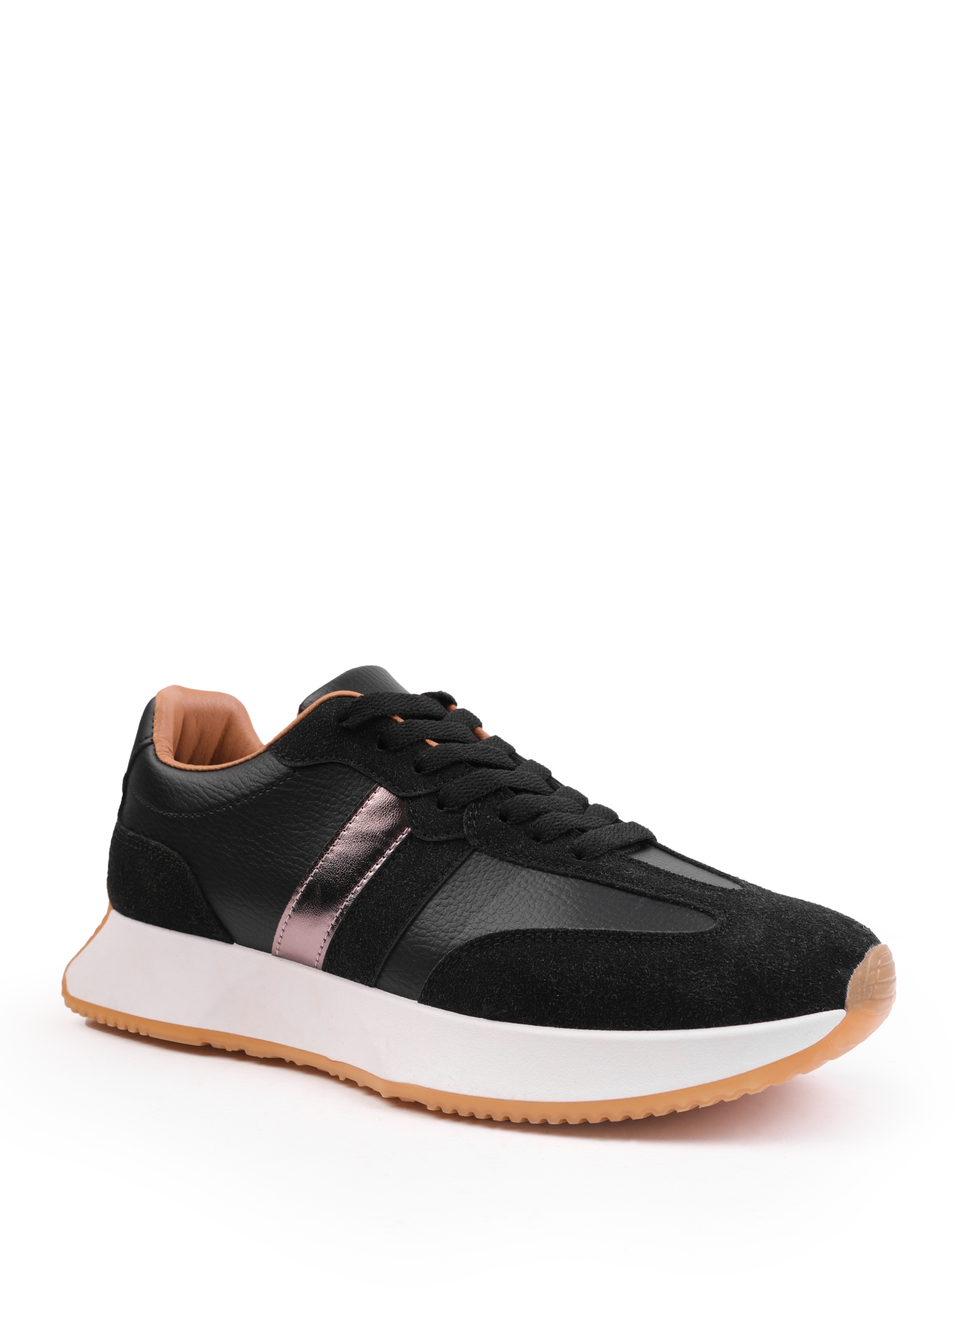 Where's That From Black Gunmetal Pulse Runner Trainers